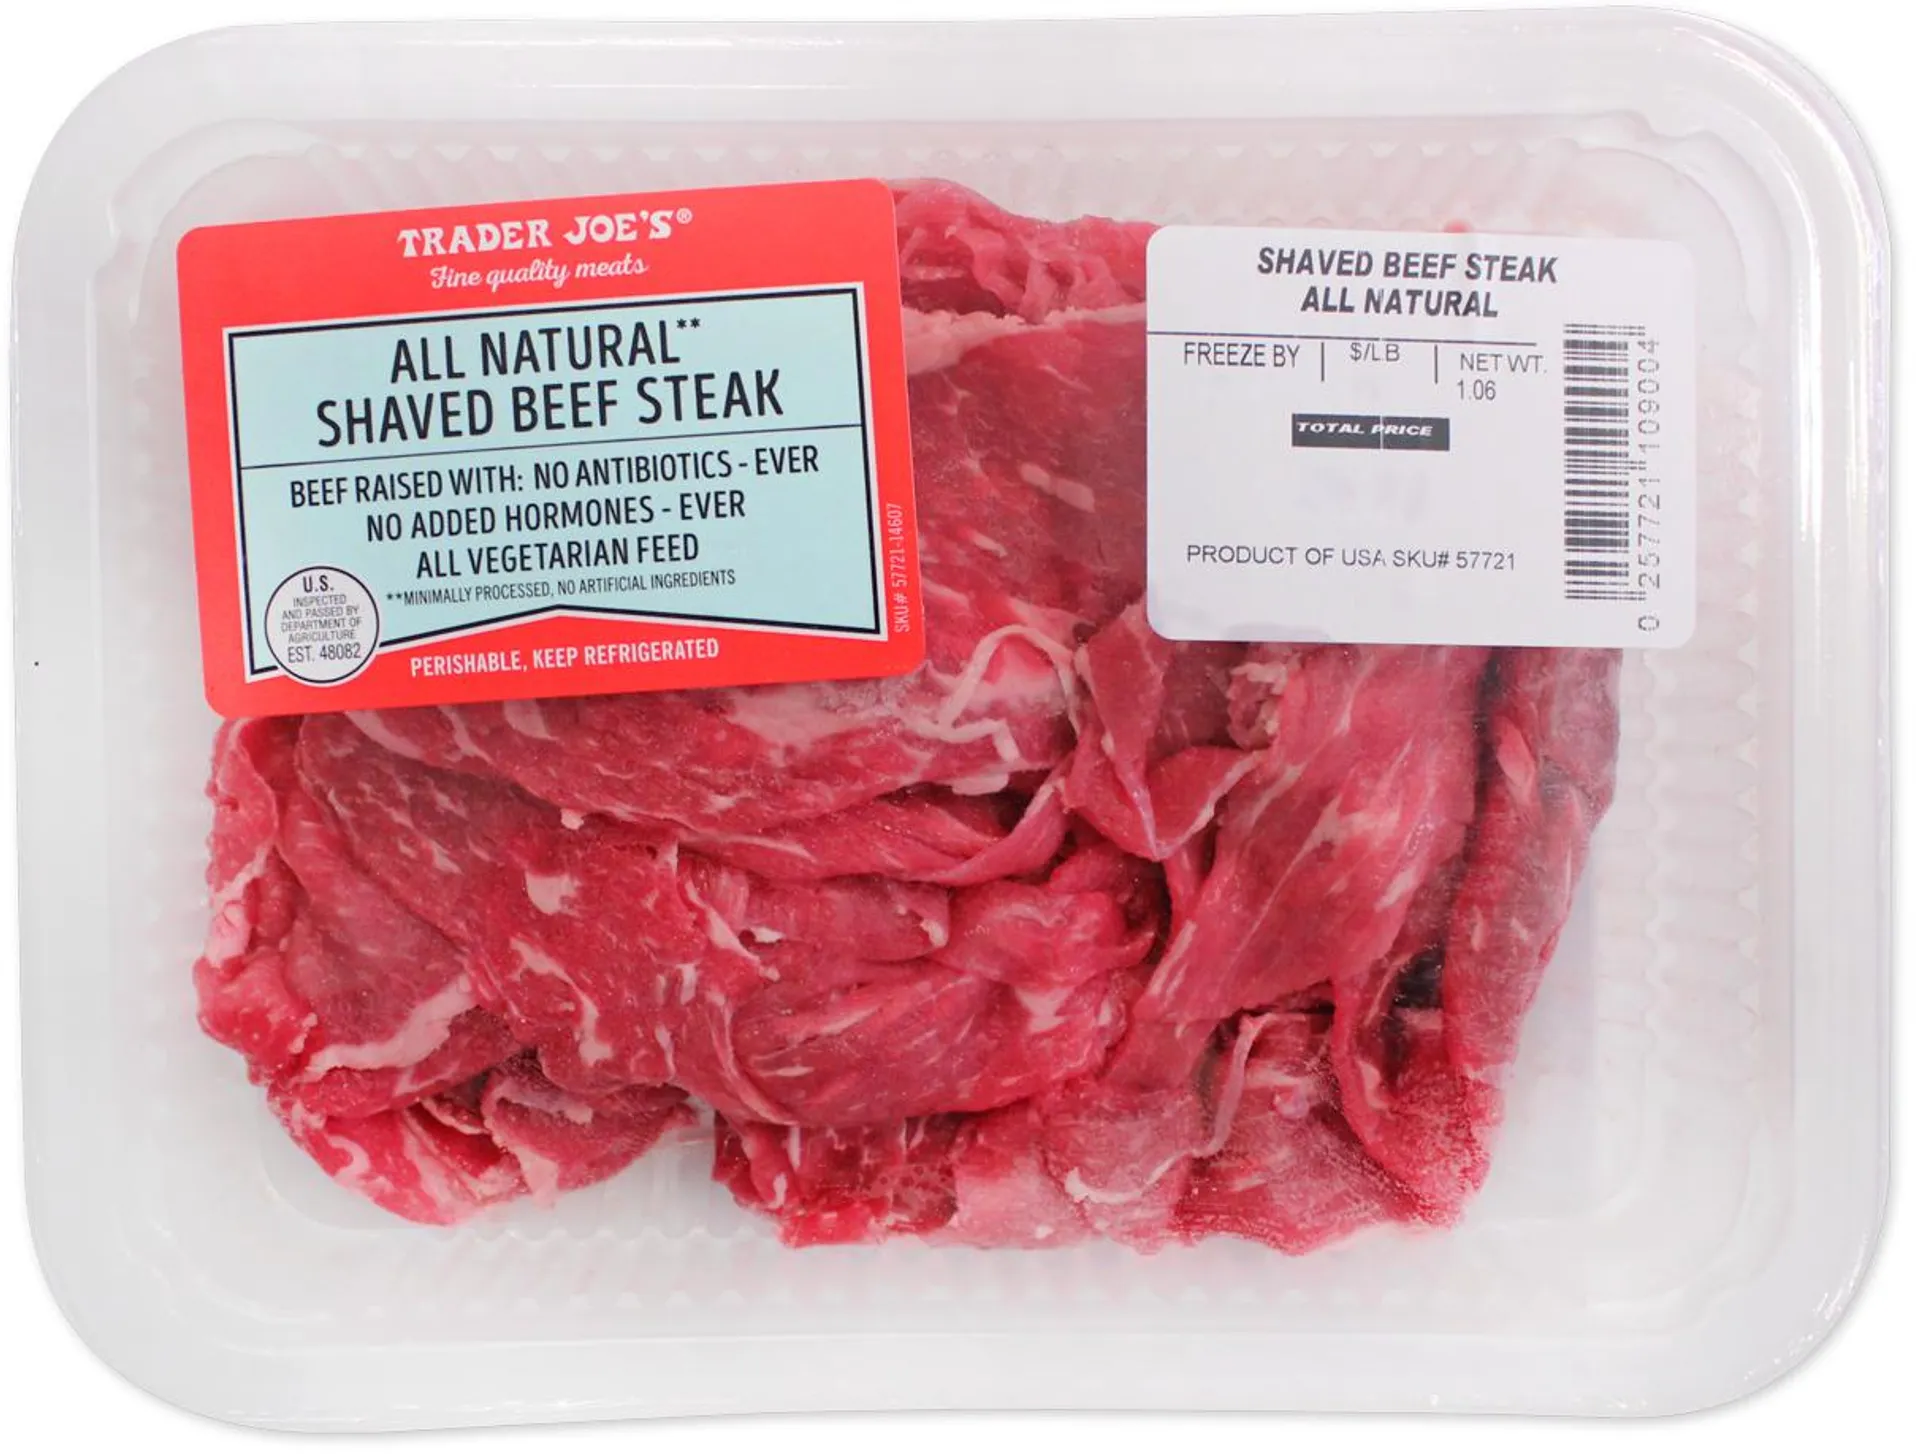 All Natural Shaved Beef Steak